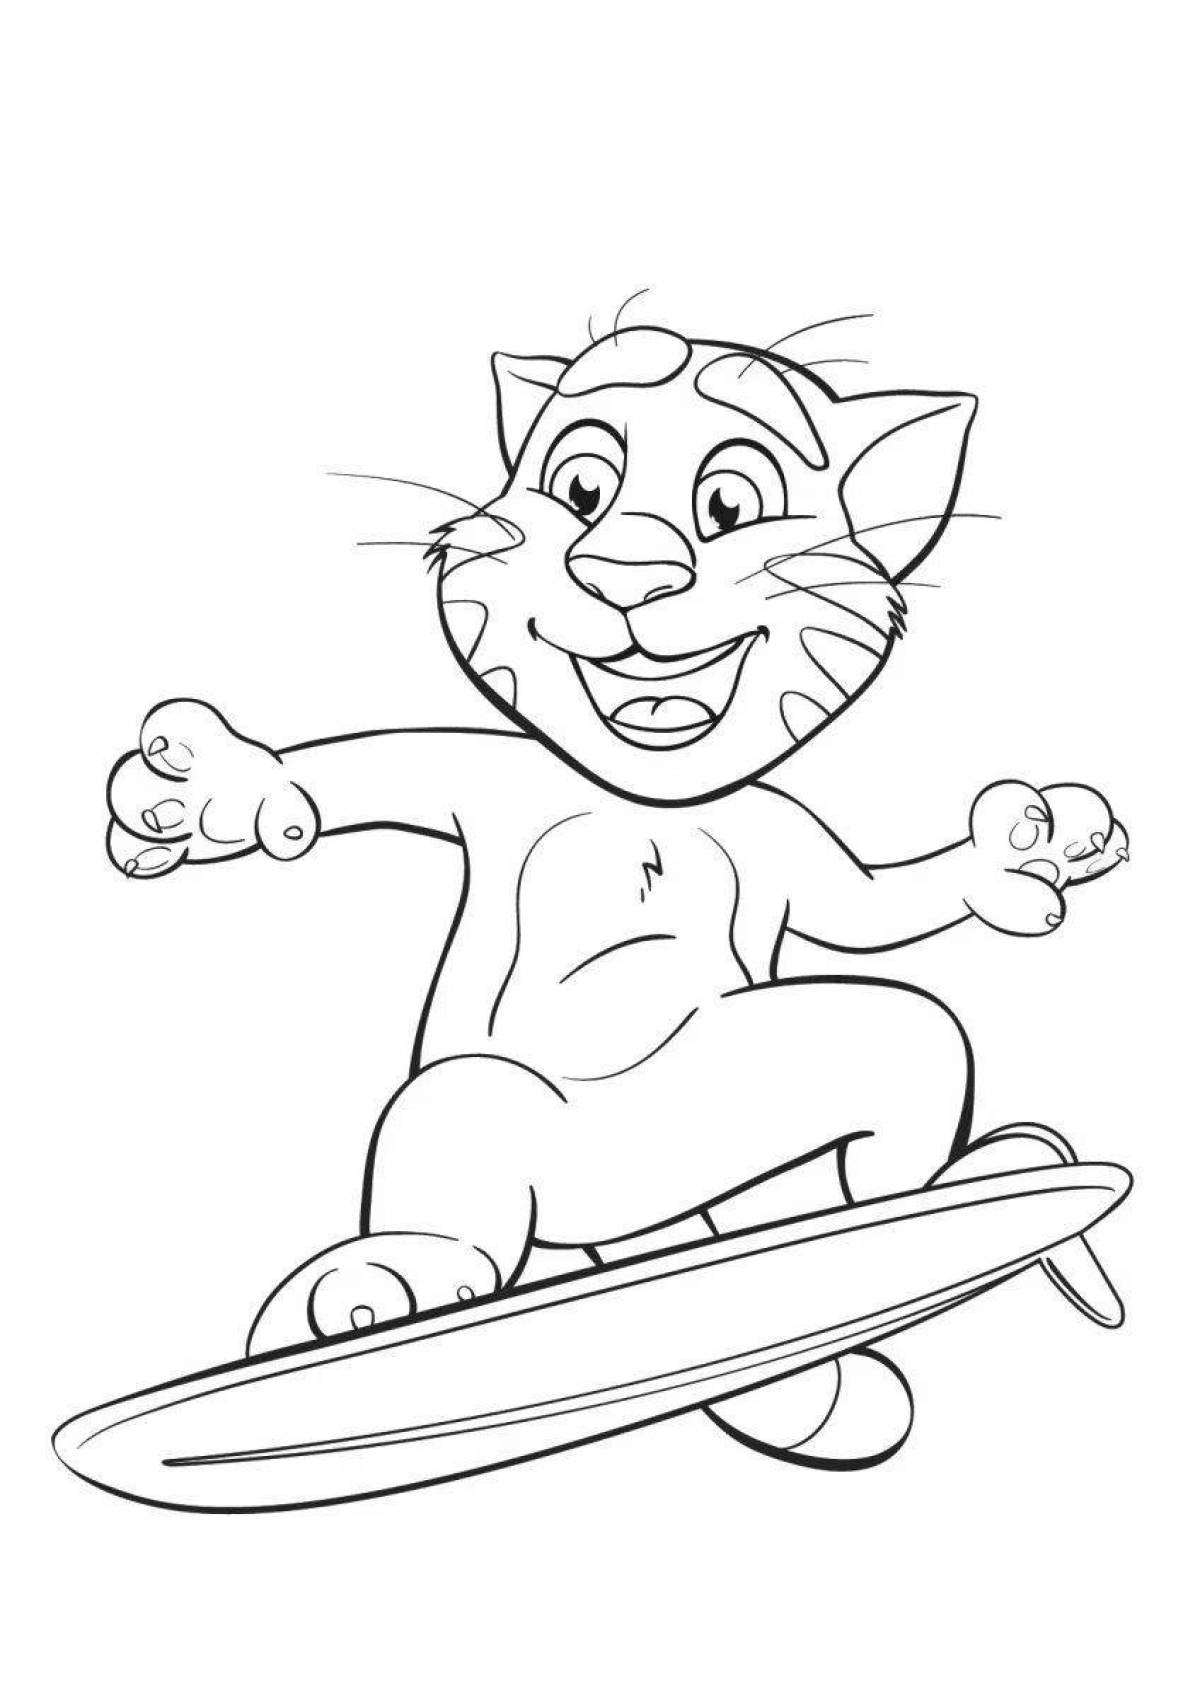 Live ginger cat coloring book